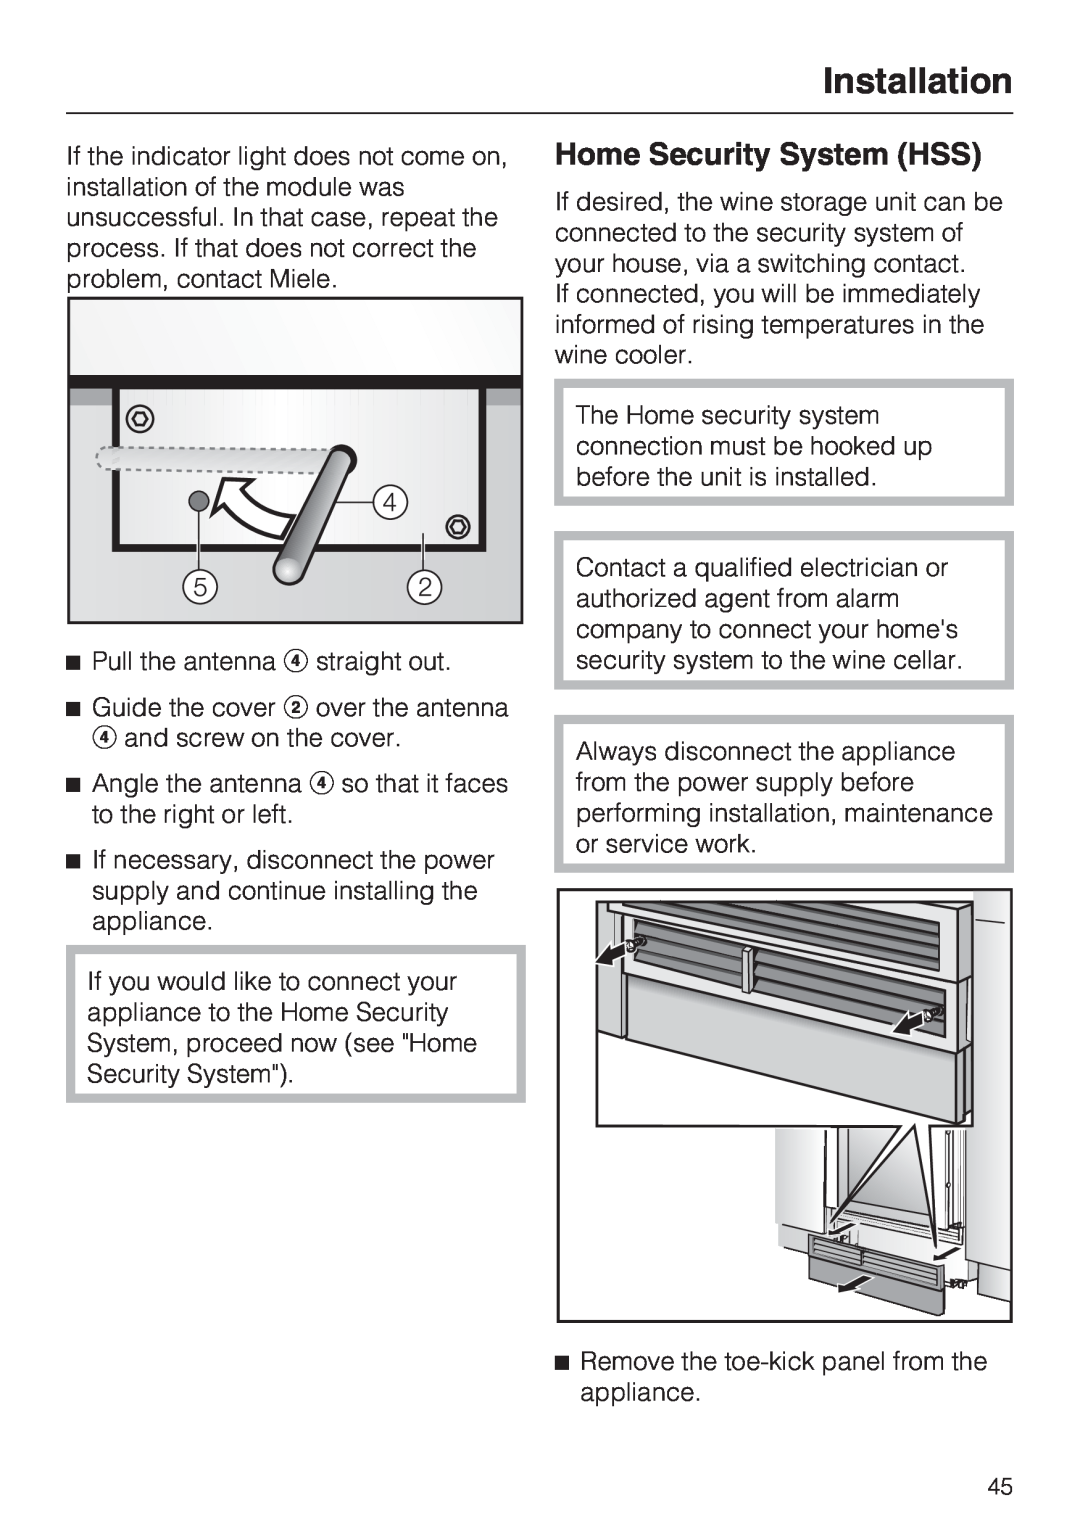 Miele KWT1601VI, KWT1611VI installation instructions Home Security System HSS, Installation 